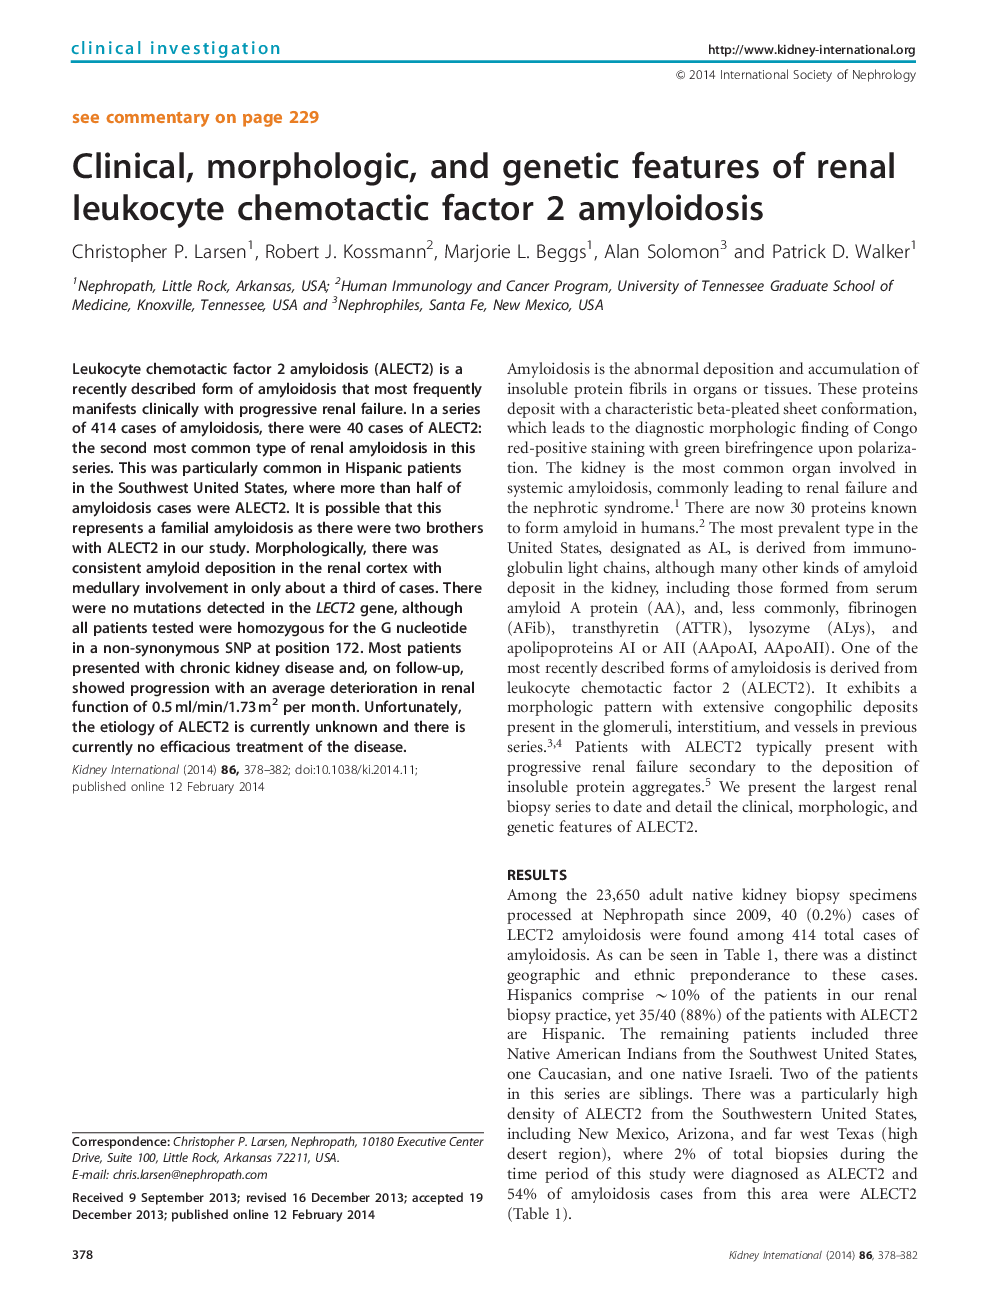 Clinical, morphologic, and genetic features of renal leukocyte chemotactic factor 2 amyloidosis